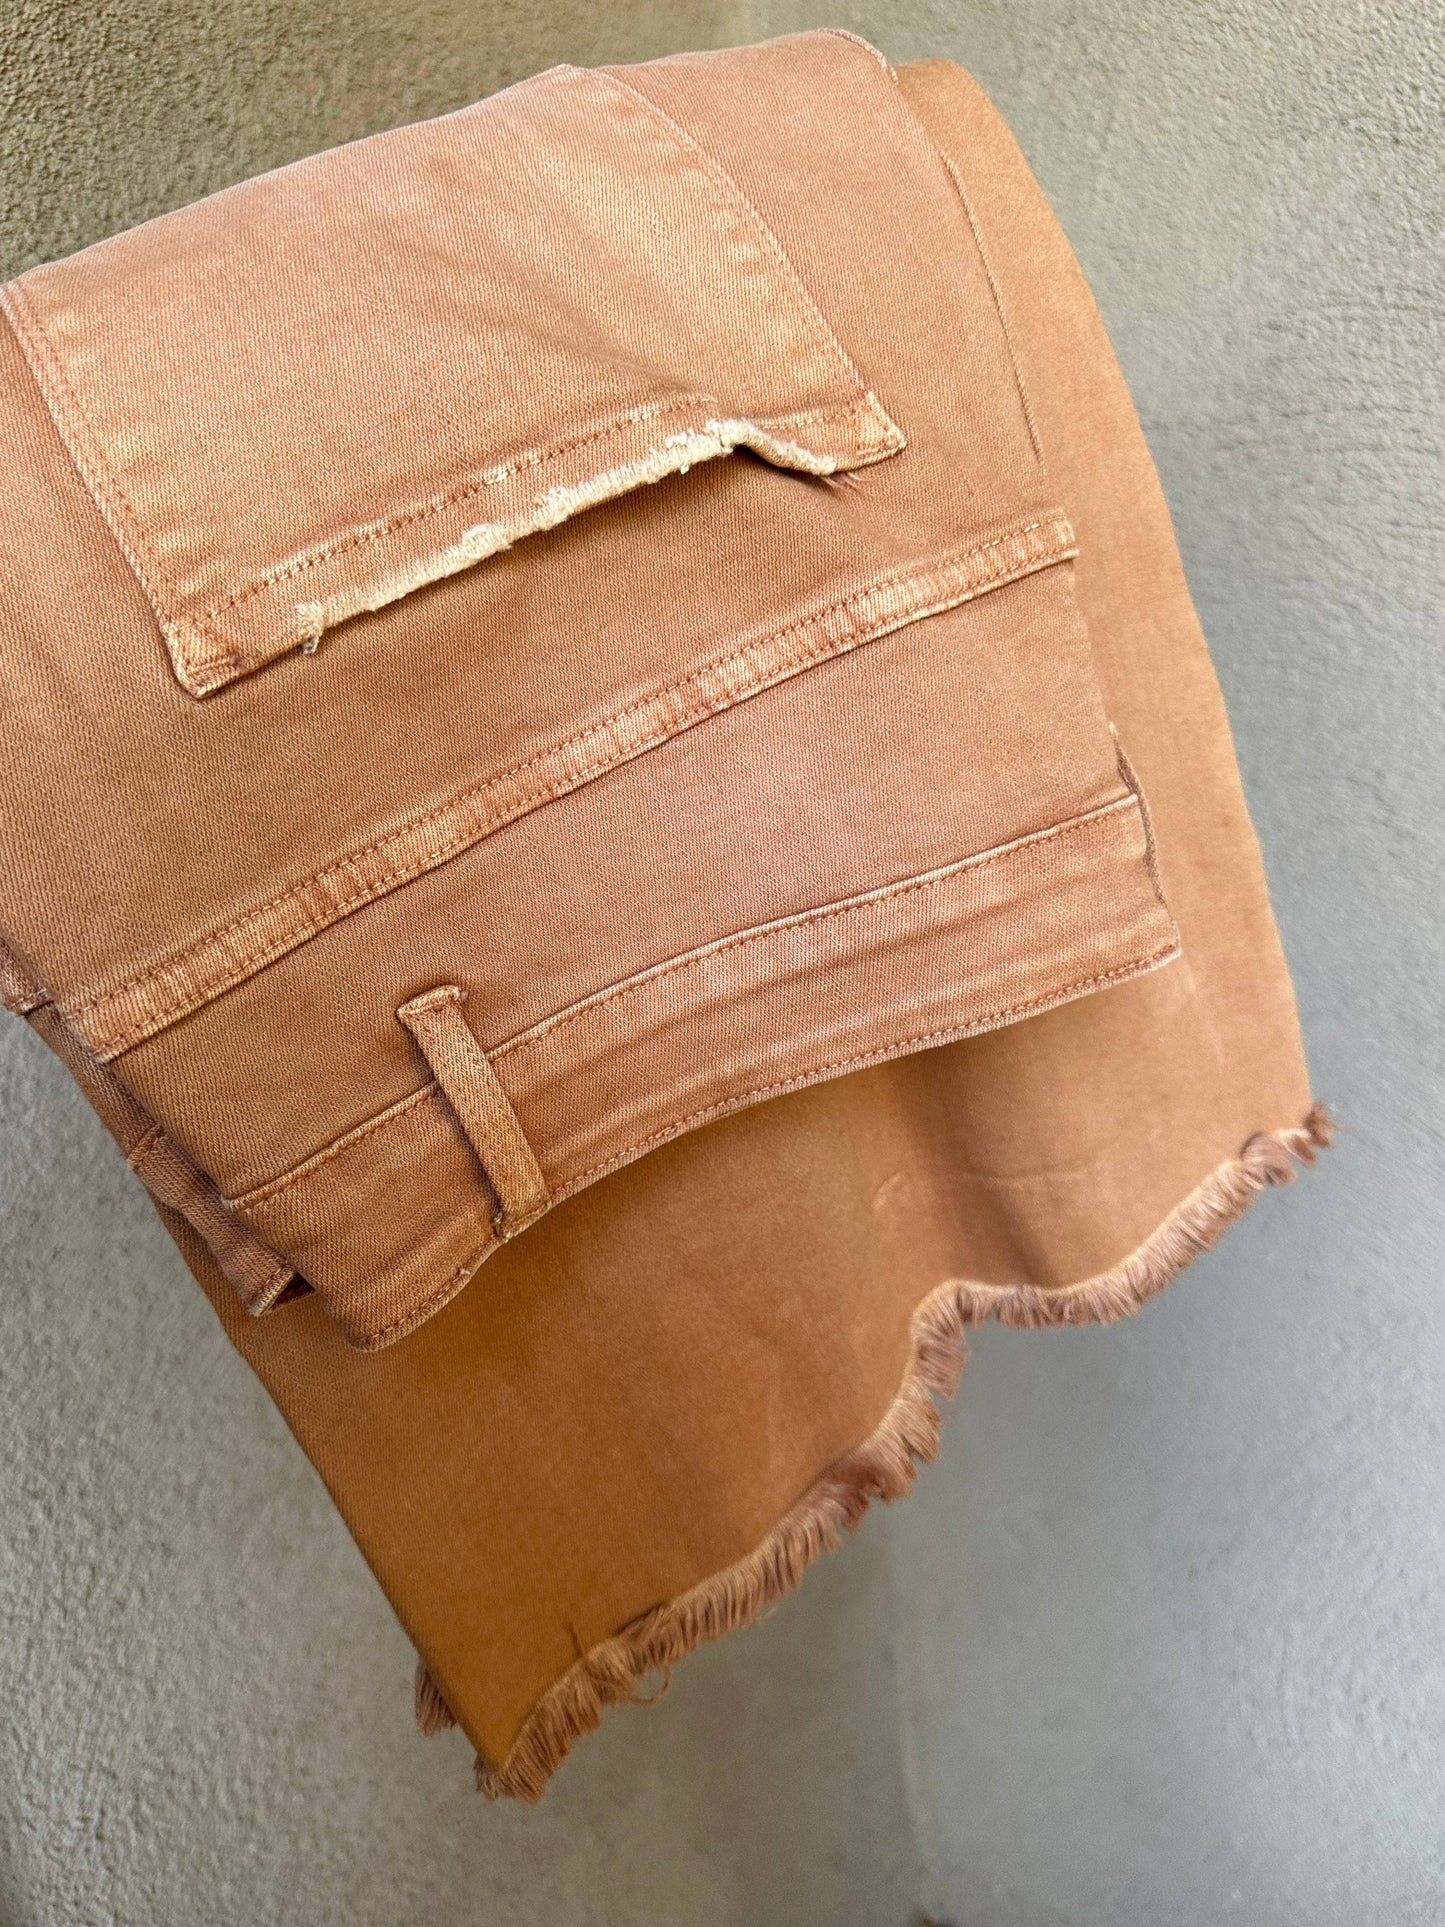 BLAKELEY DISTRESSED COLORED JEANS: CAMEL / REG-32" INSEAM